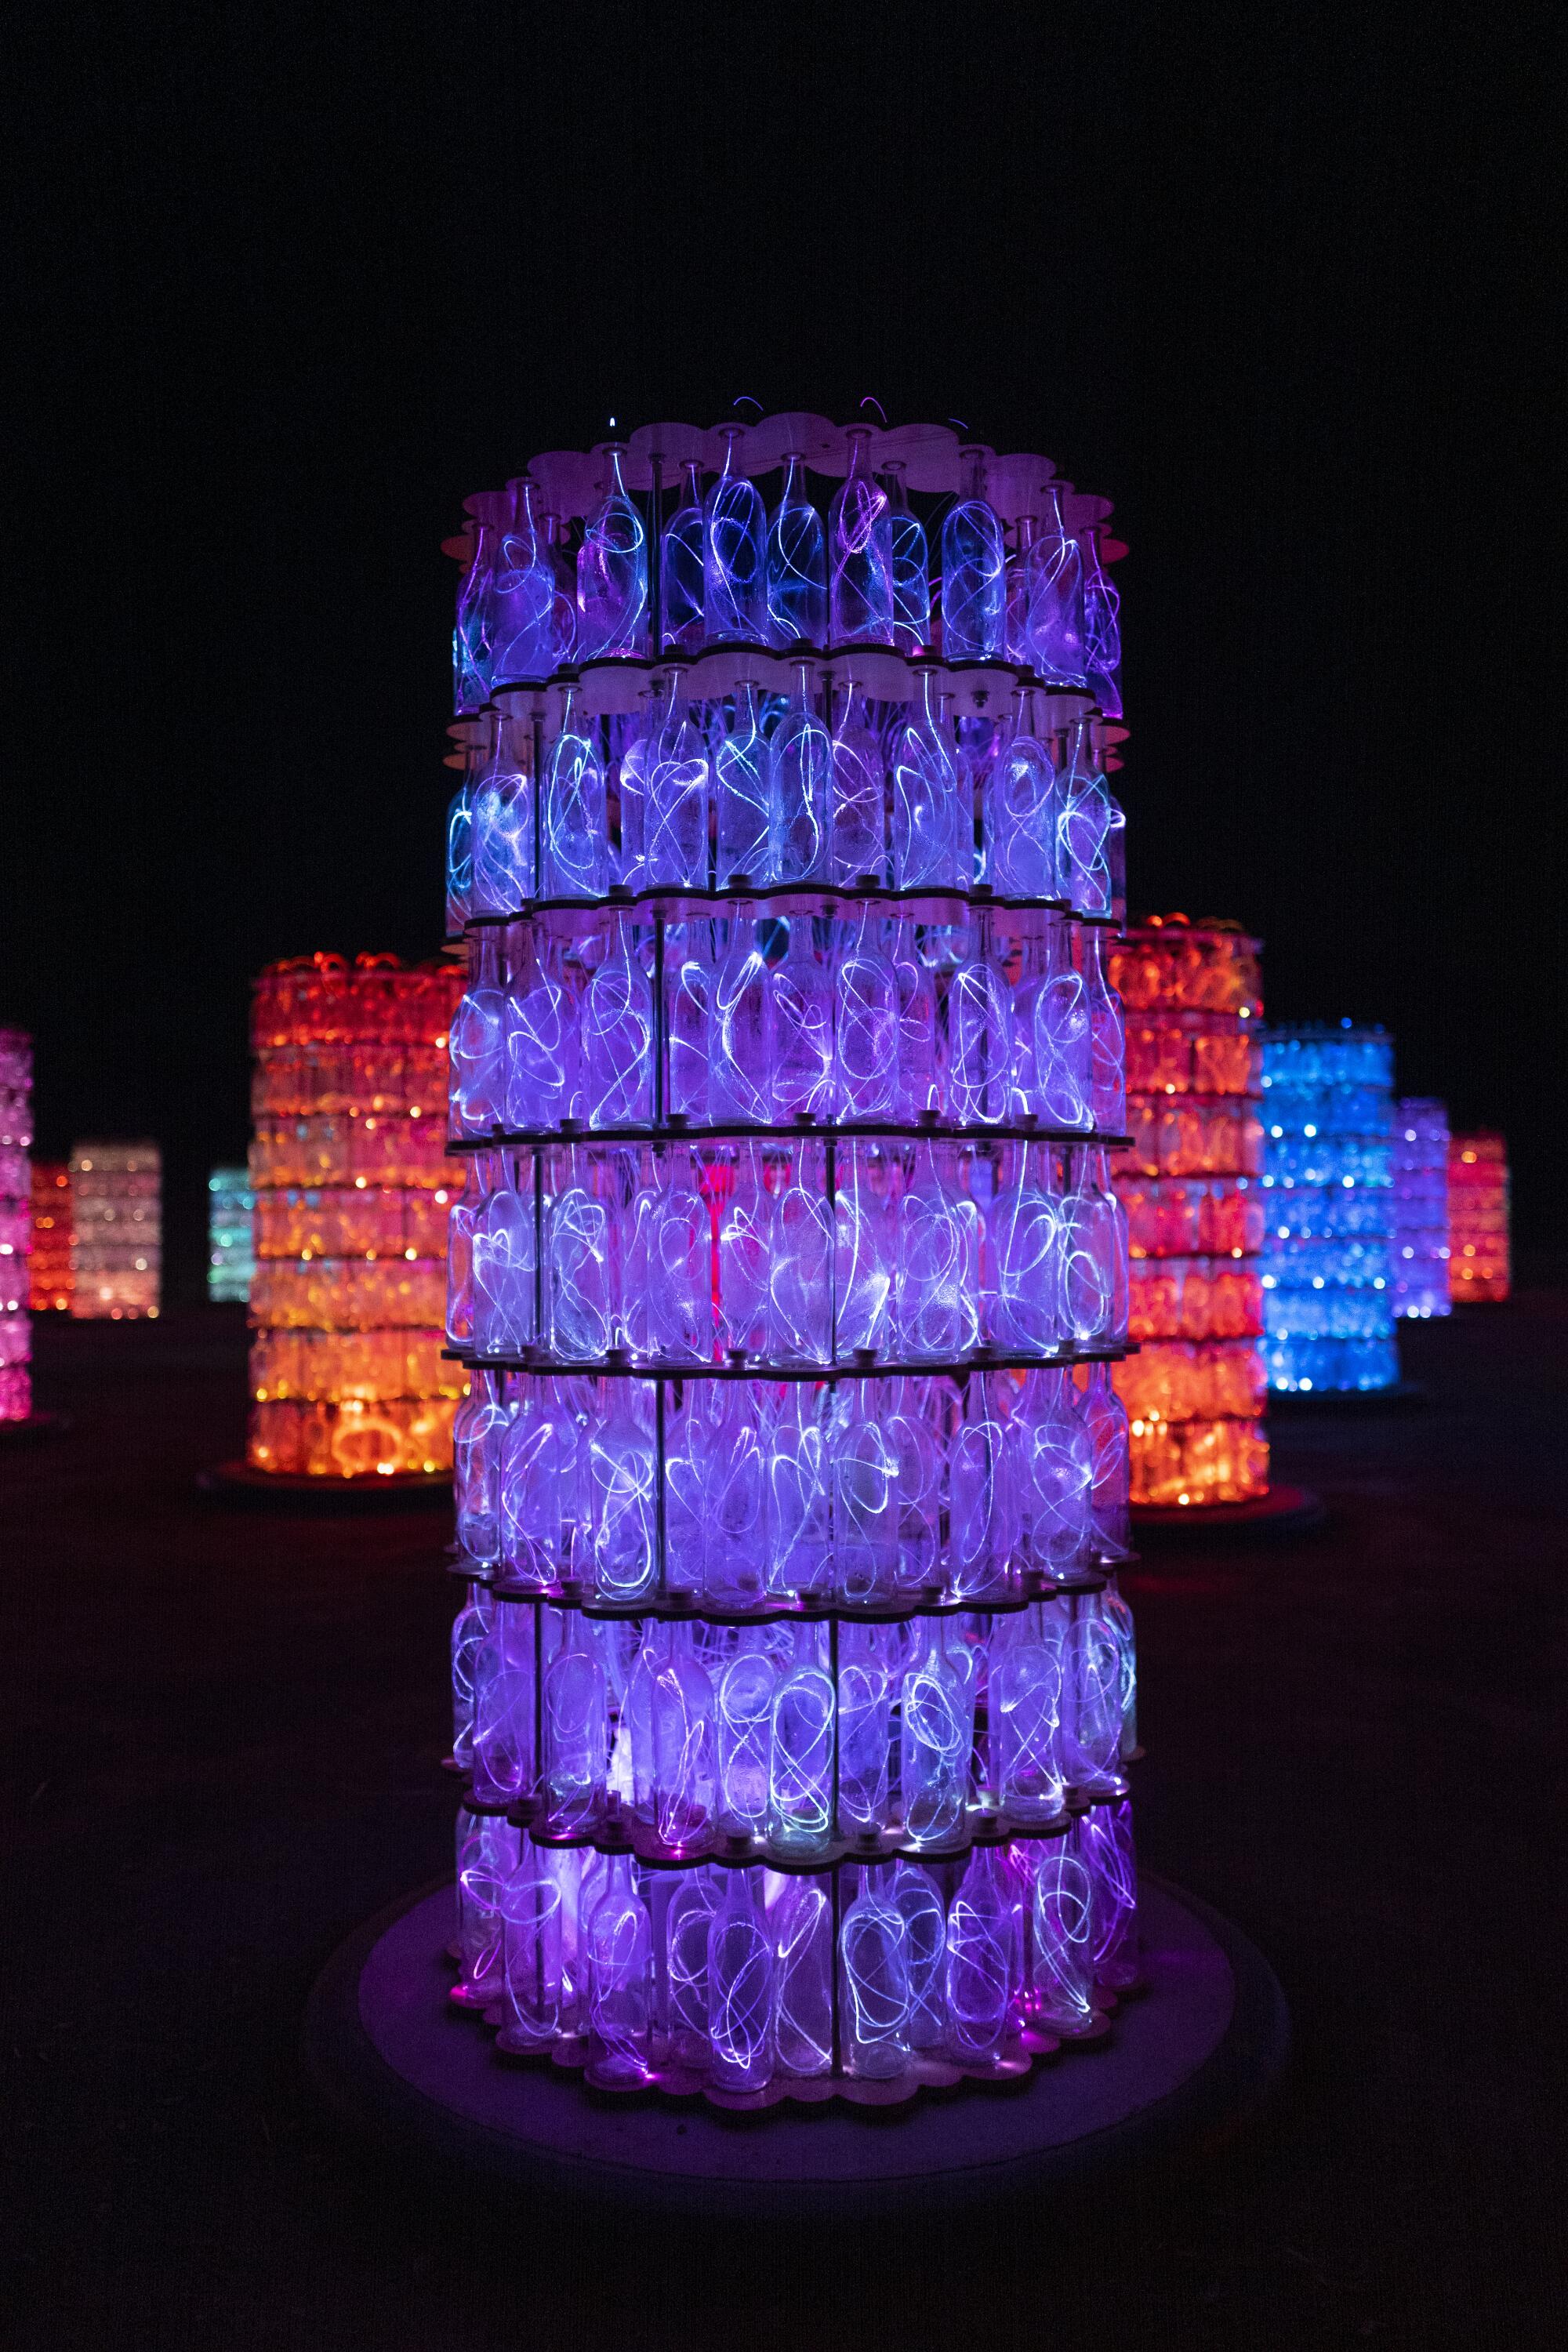 One of 69 towers of light.